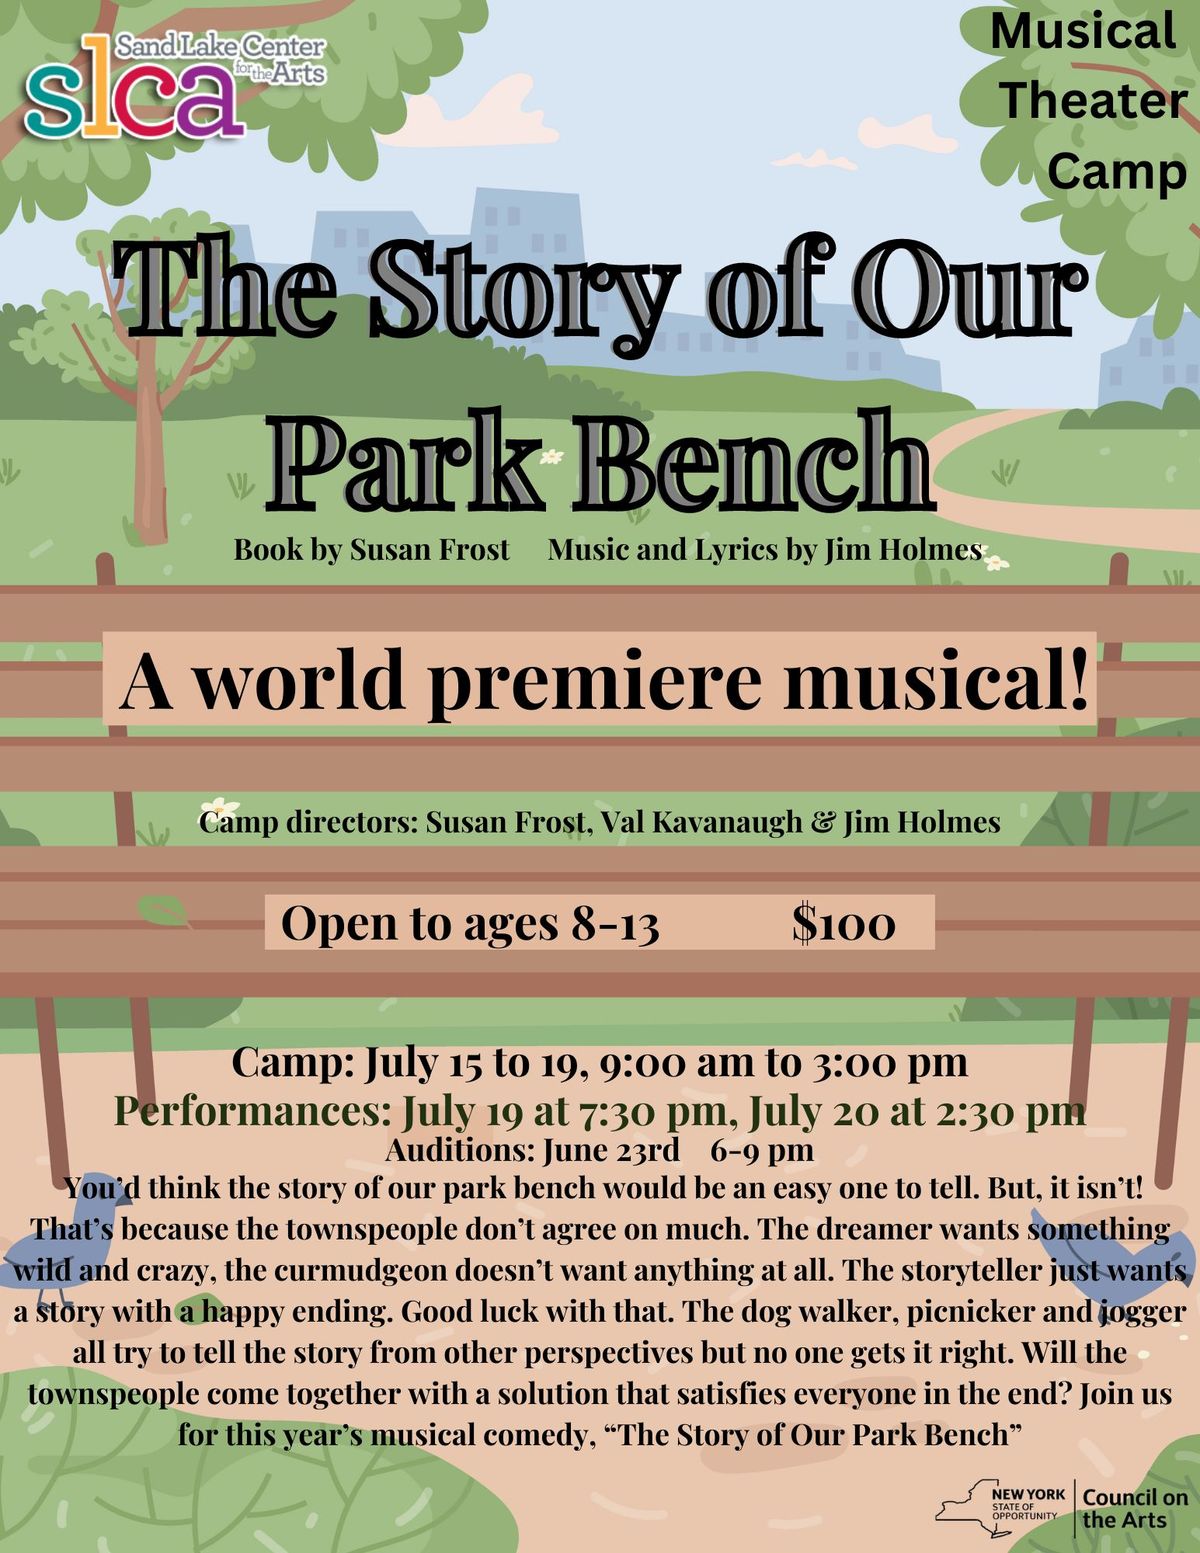 SLCA Summer Musical Camp: The Story of Our Park Bench